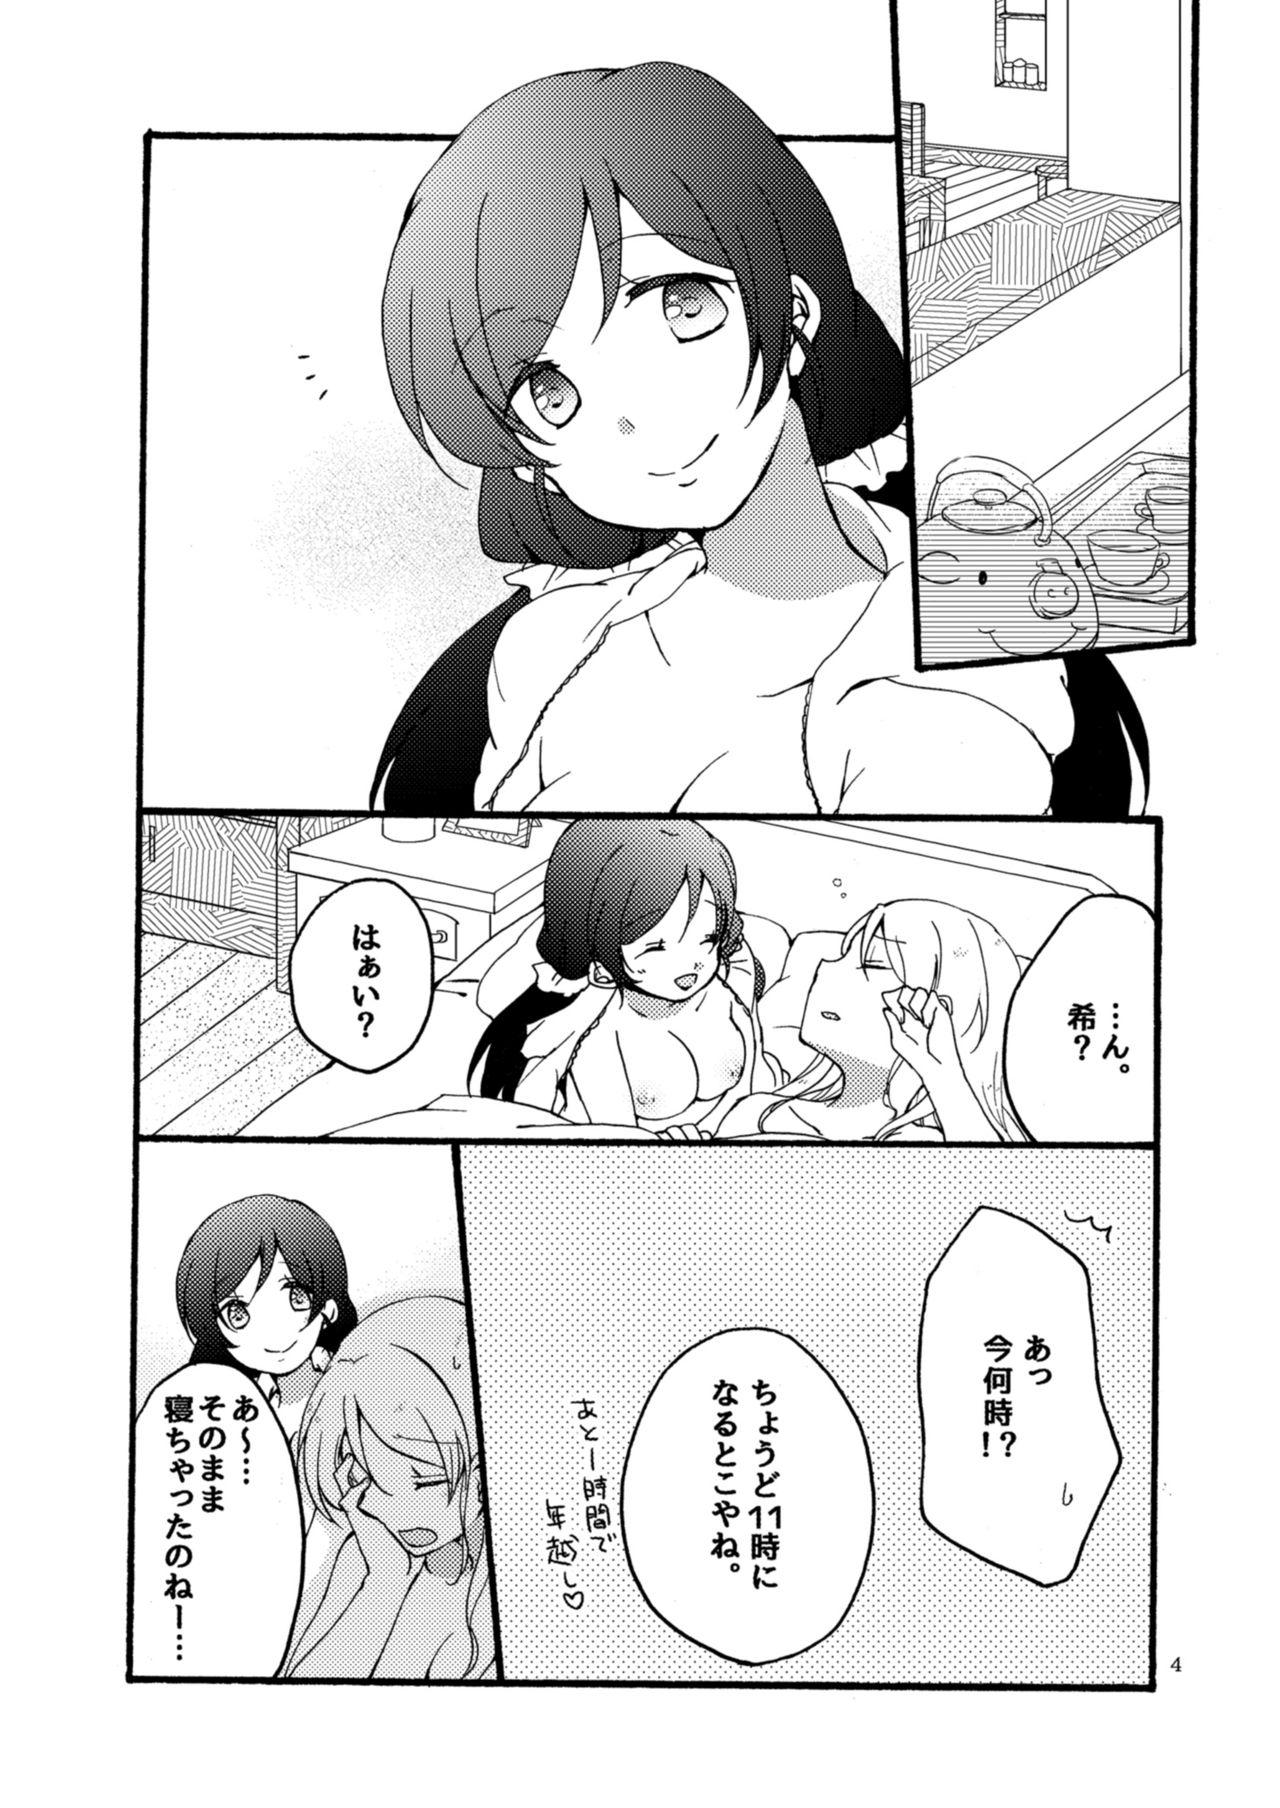 Butt Plug 12/31 - Love live Spooning - Page 4